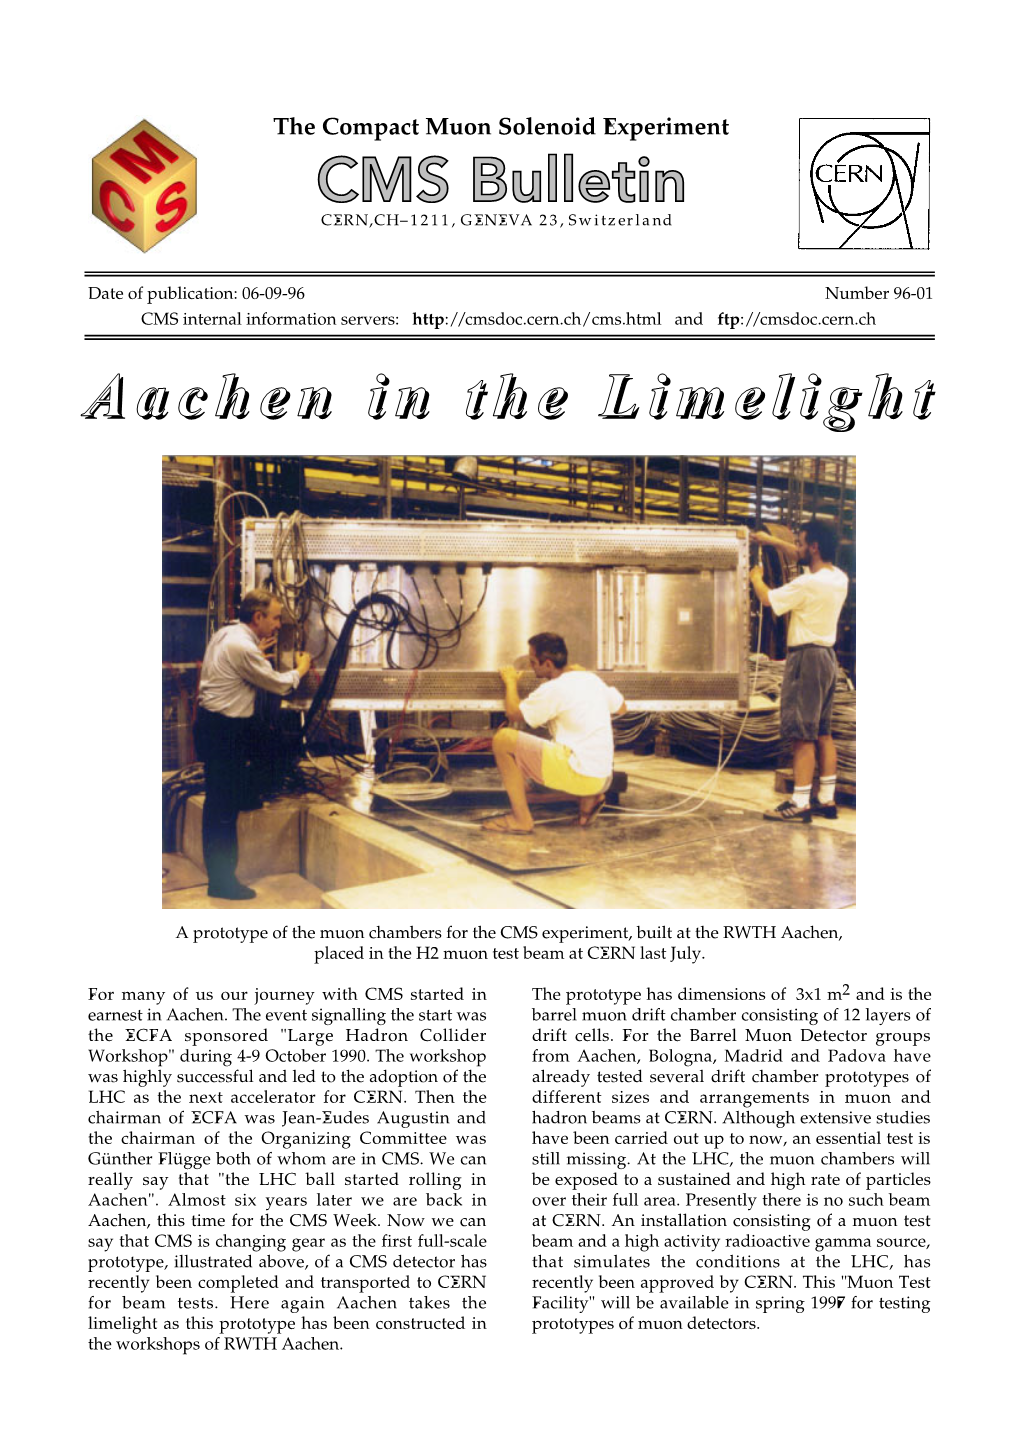 Aachen in the Limelight